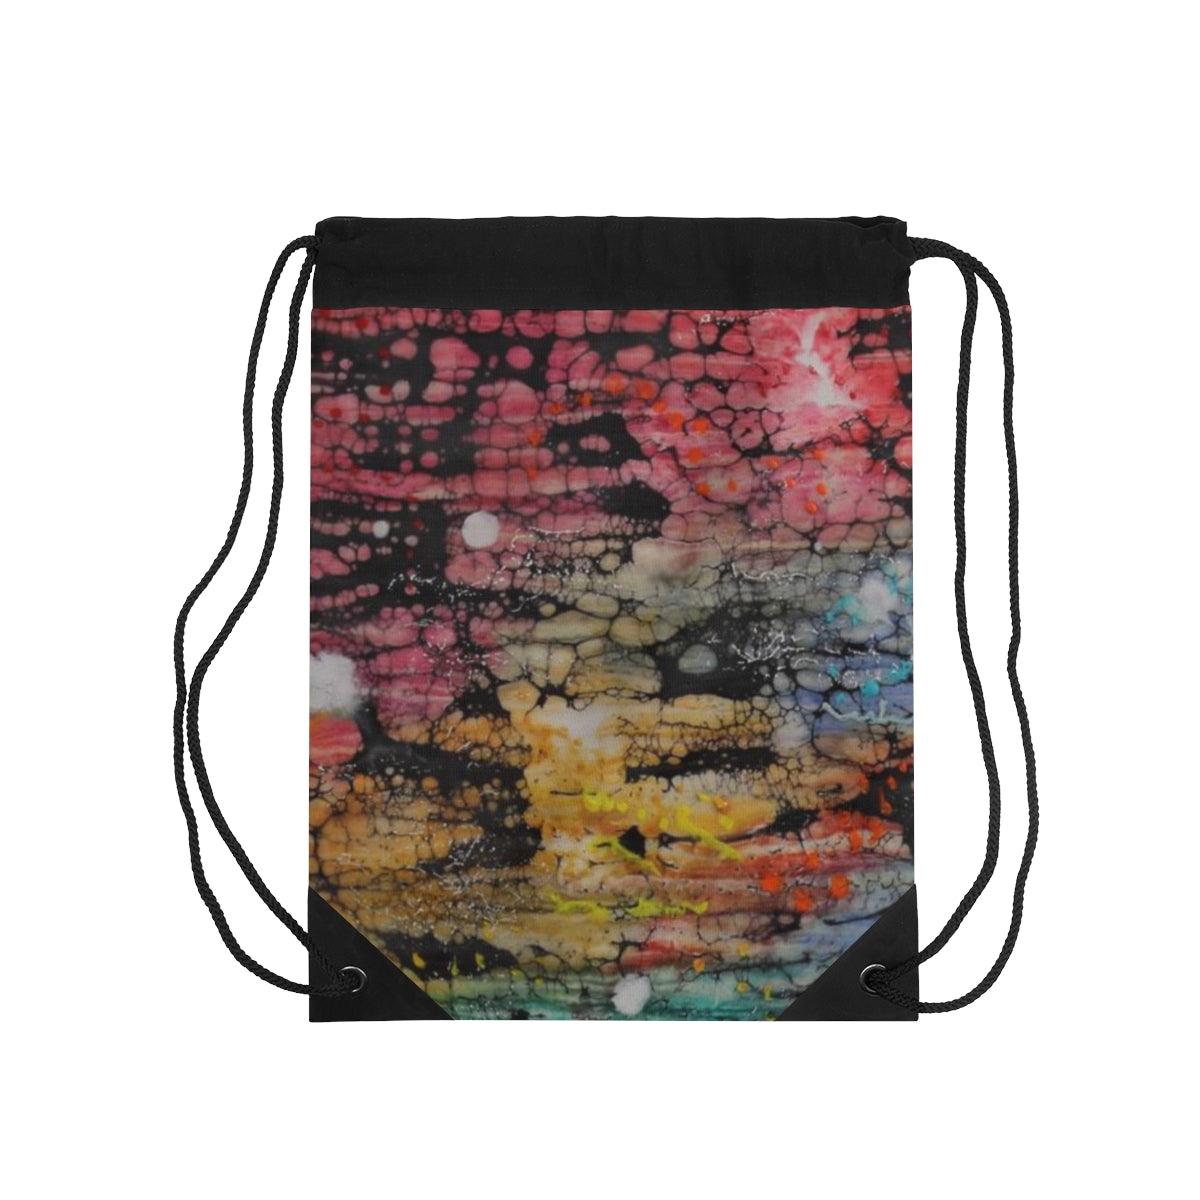 "Synapse 2" Drawstring Bag-Bags - Mike Giannella - Encaustic Painting - Mixed Media Artist - Art Prints